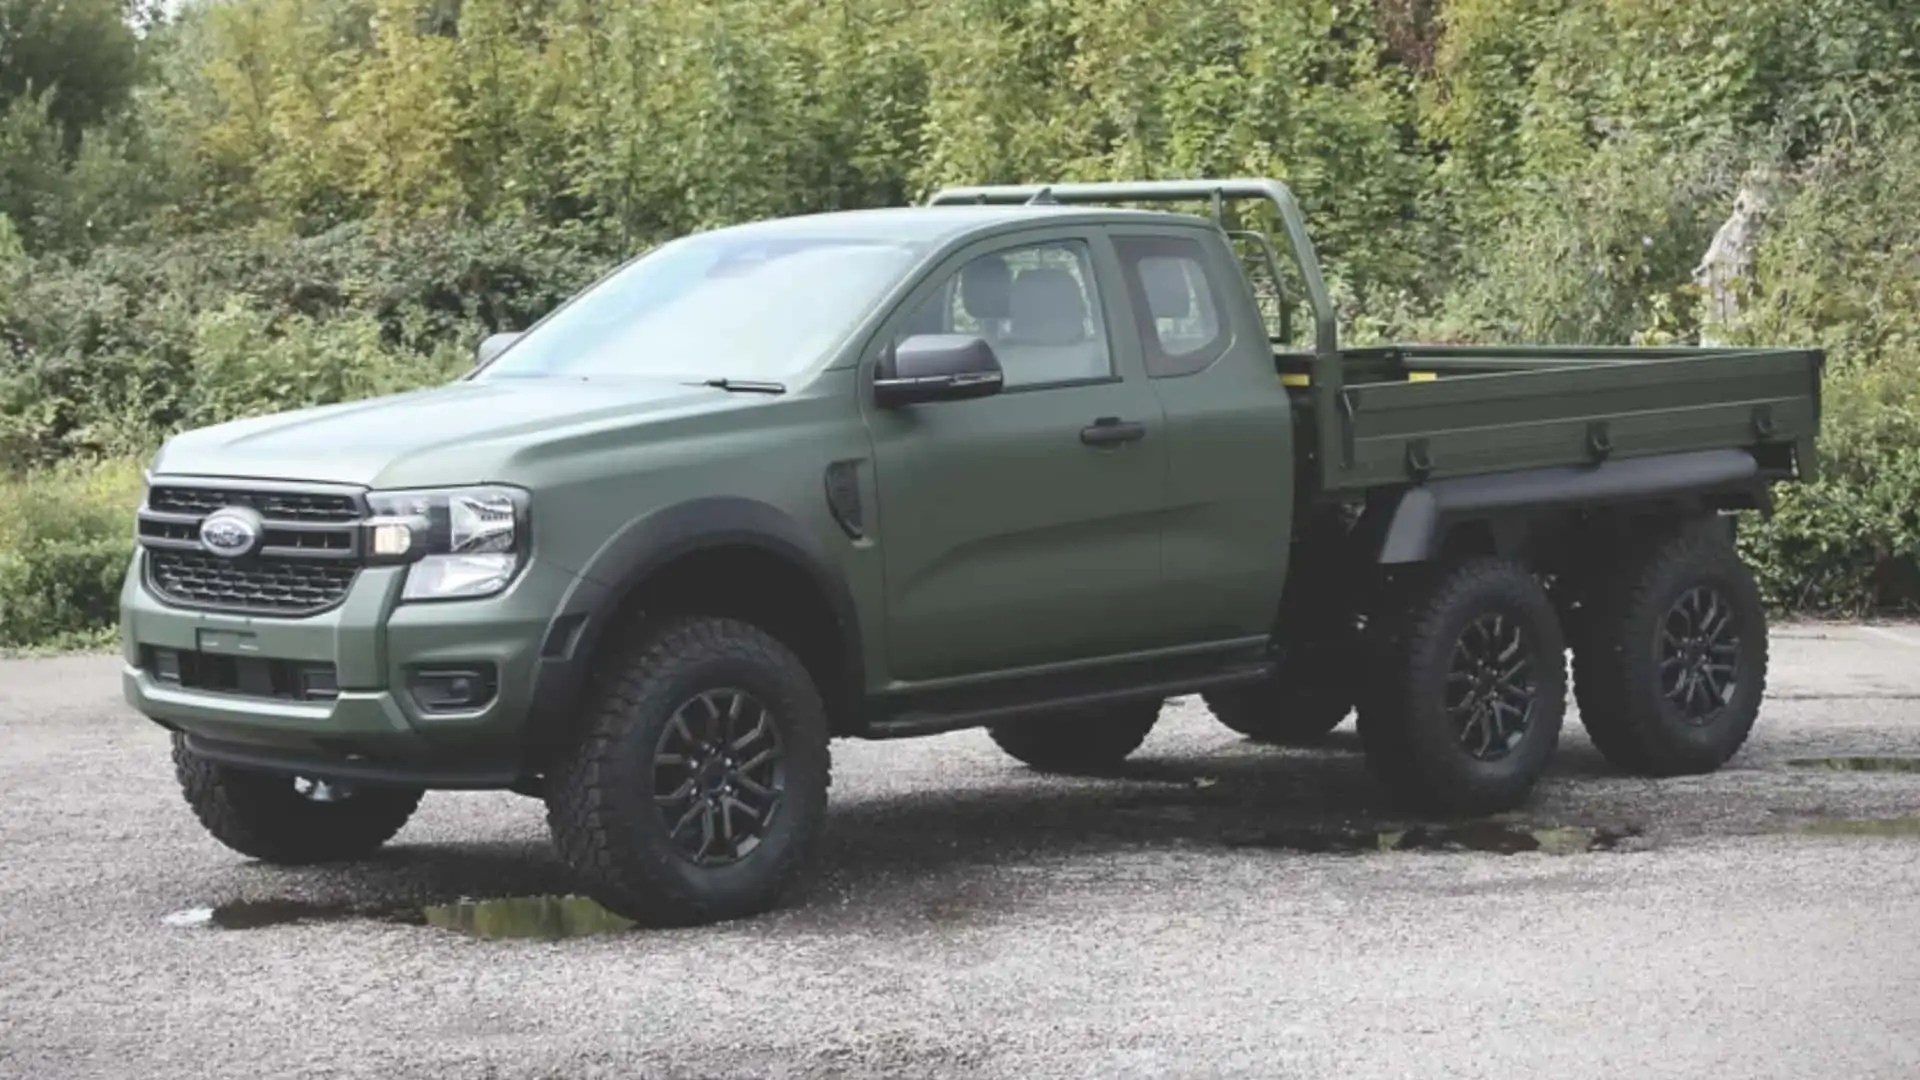 Ford Ranger HEX 6x6 by Ricardo painted in a tough olive green